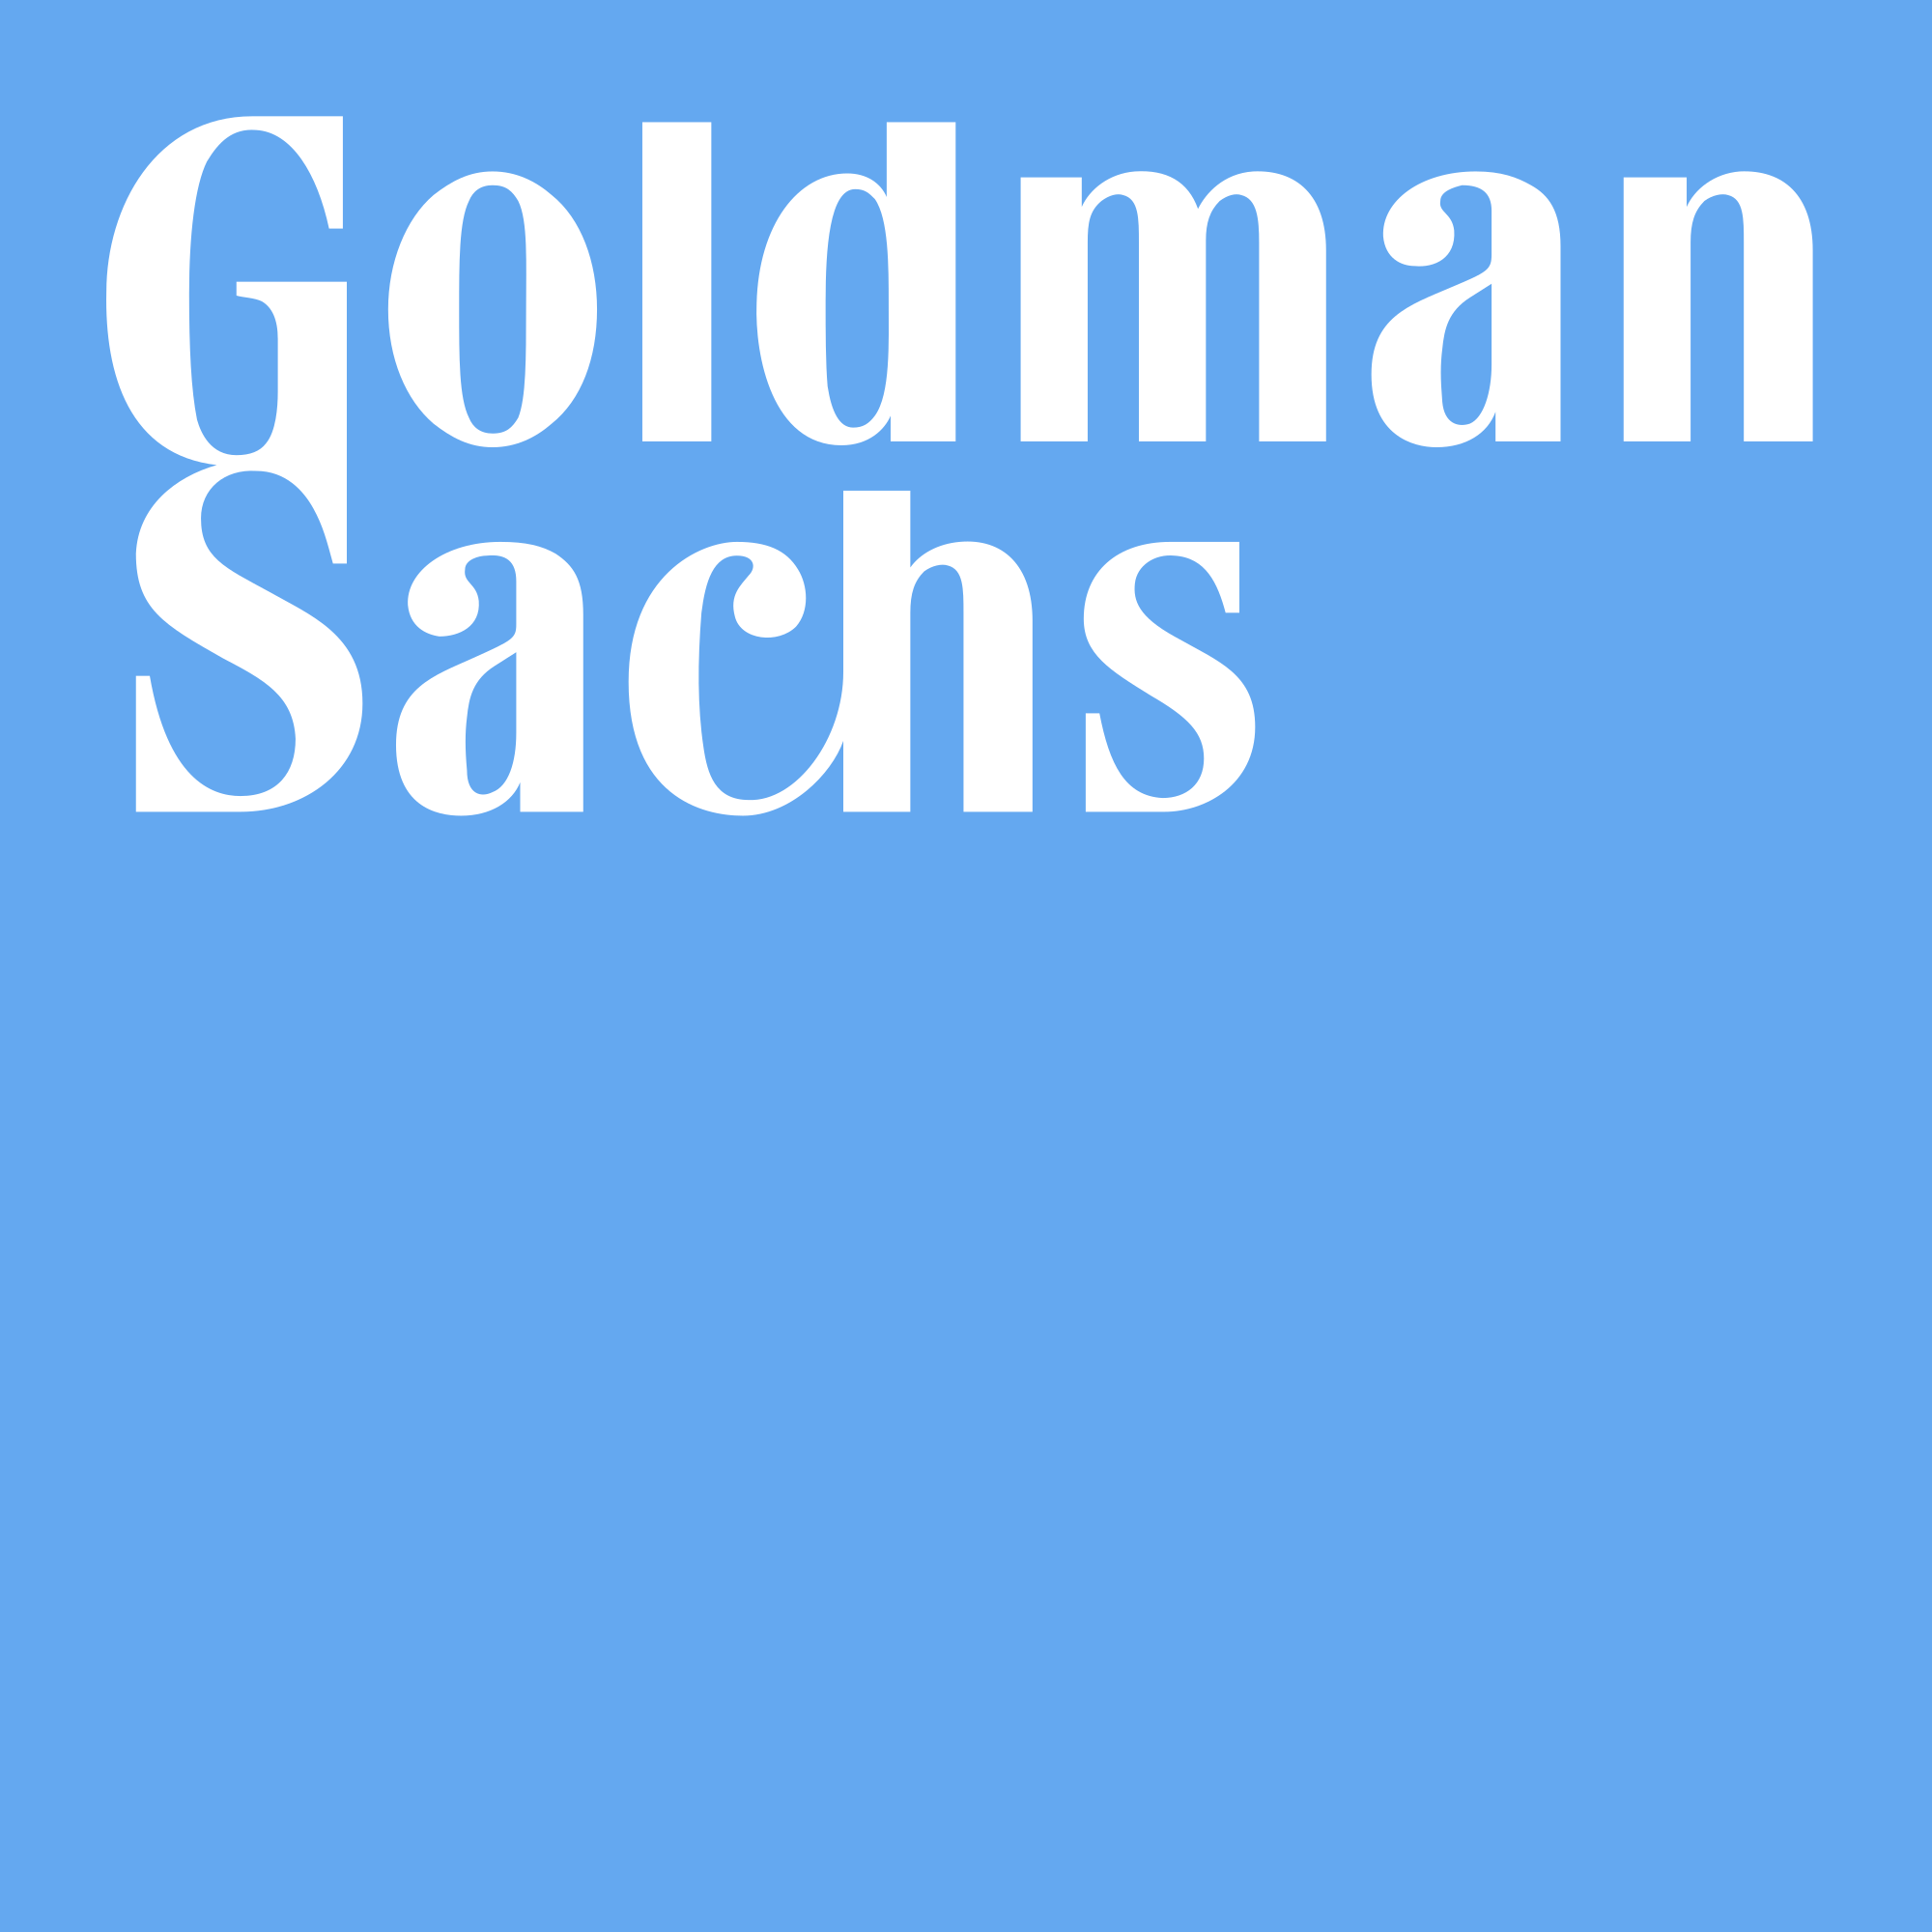 Goldman Sachs believes independence supporters will win 1st October referendum